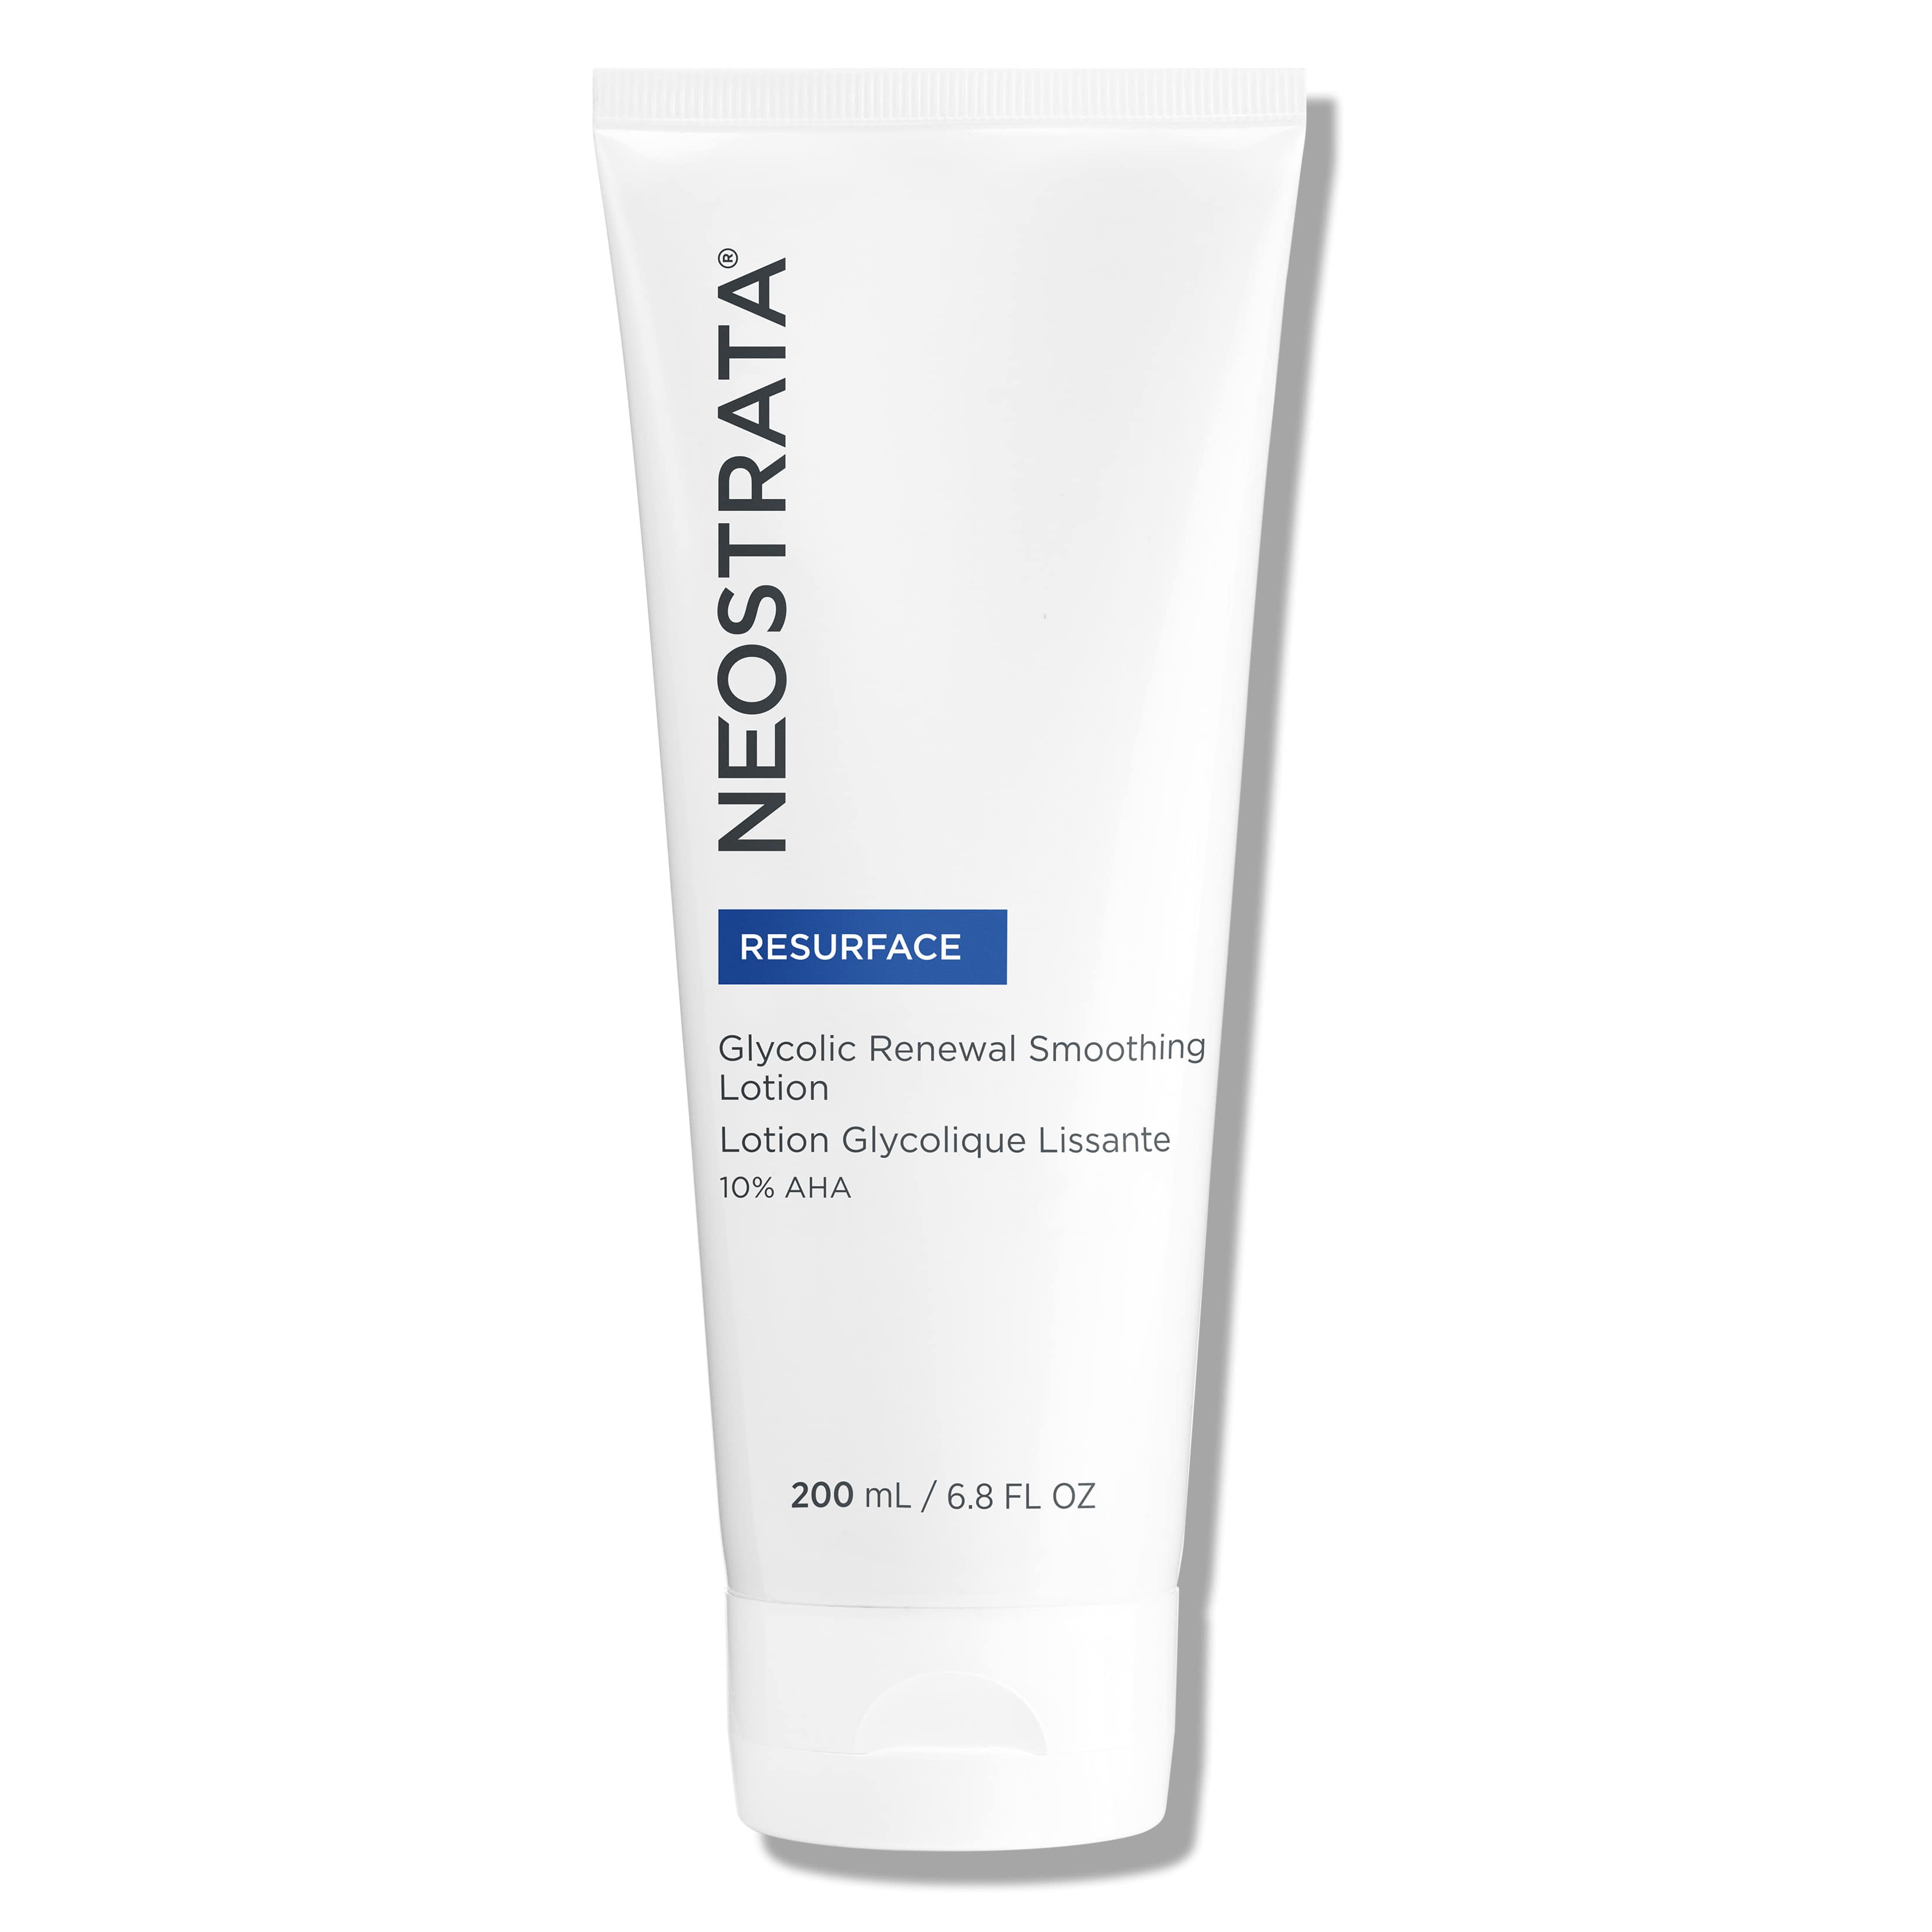 NeoStrata Glycolic Renewal Smoothing Lotion | Lightweight Skin Rejuvenation For The Whole Body | 10% AHA (Glycolic Acid & Citric Acid) | Anti-Aging